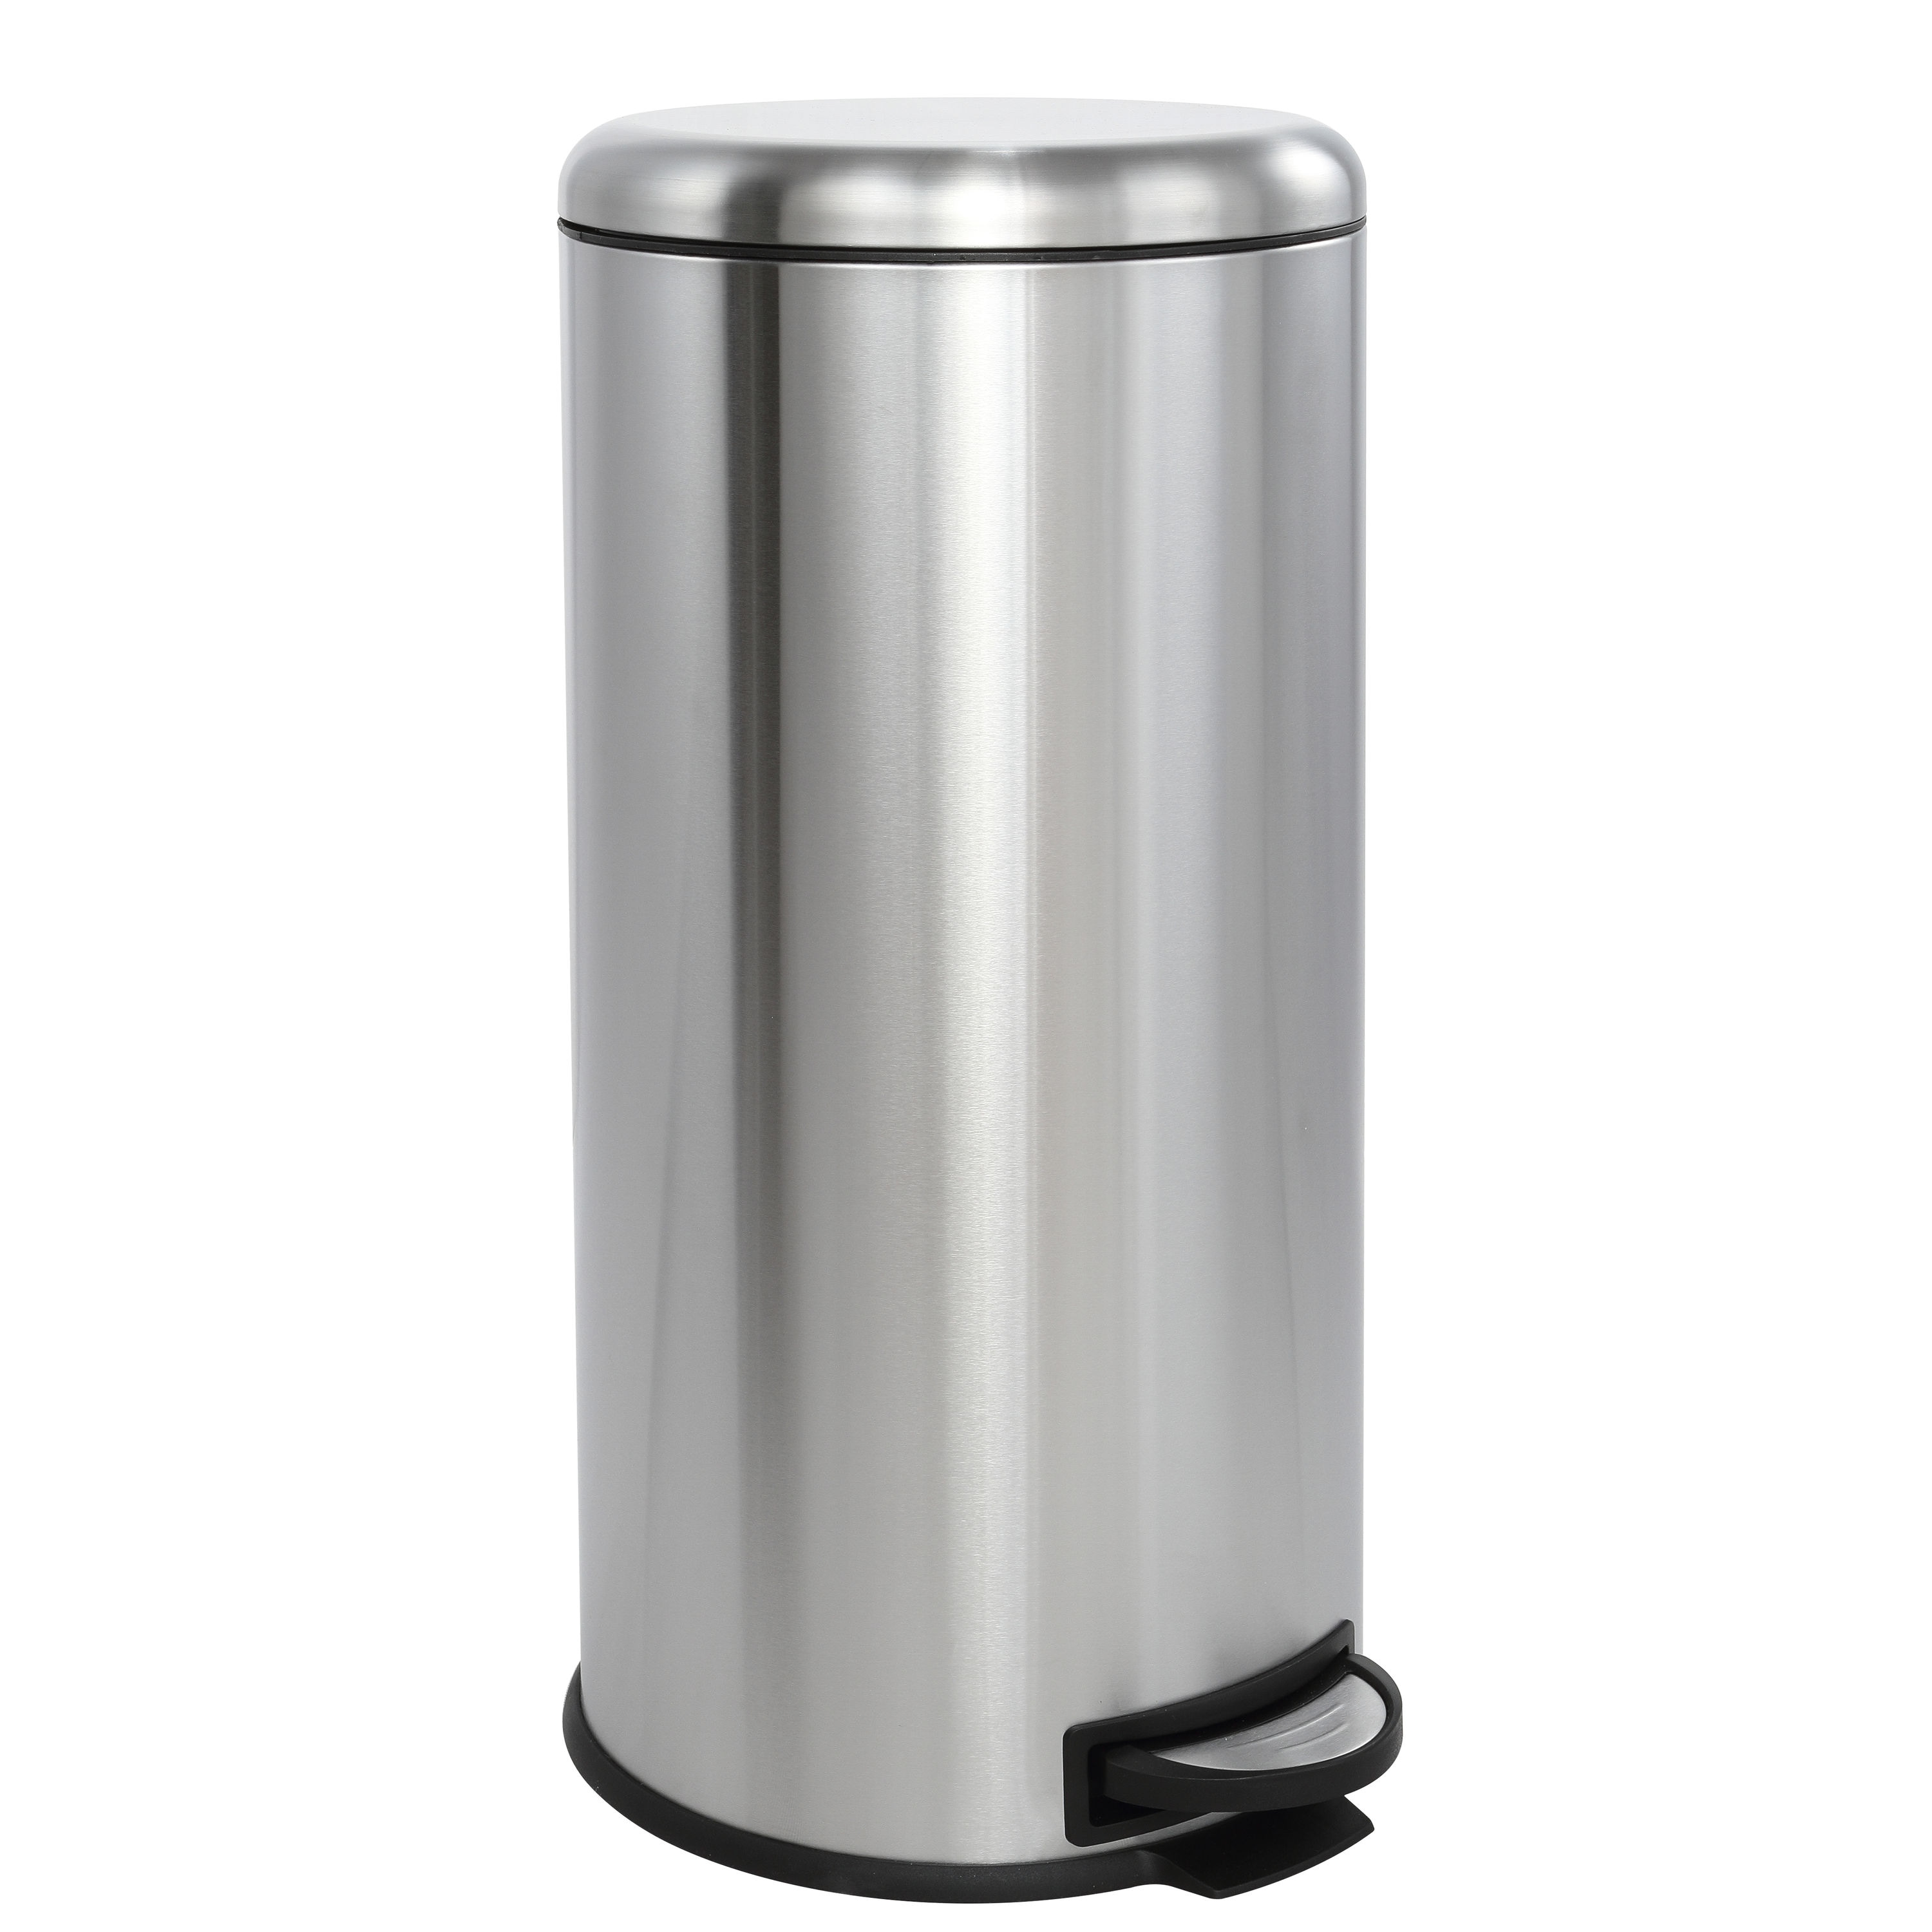 Home Zone Living 8 Gallon Round Kitchen Trash Can, Stainless Steel